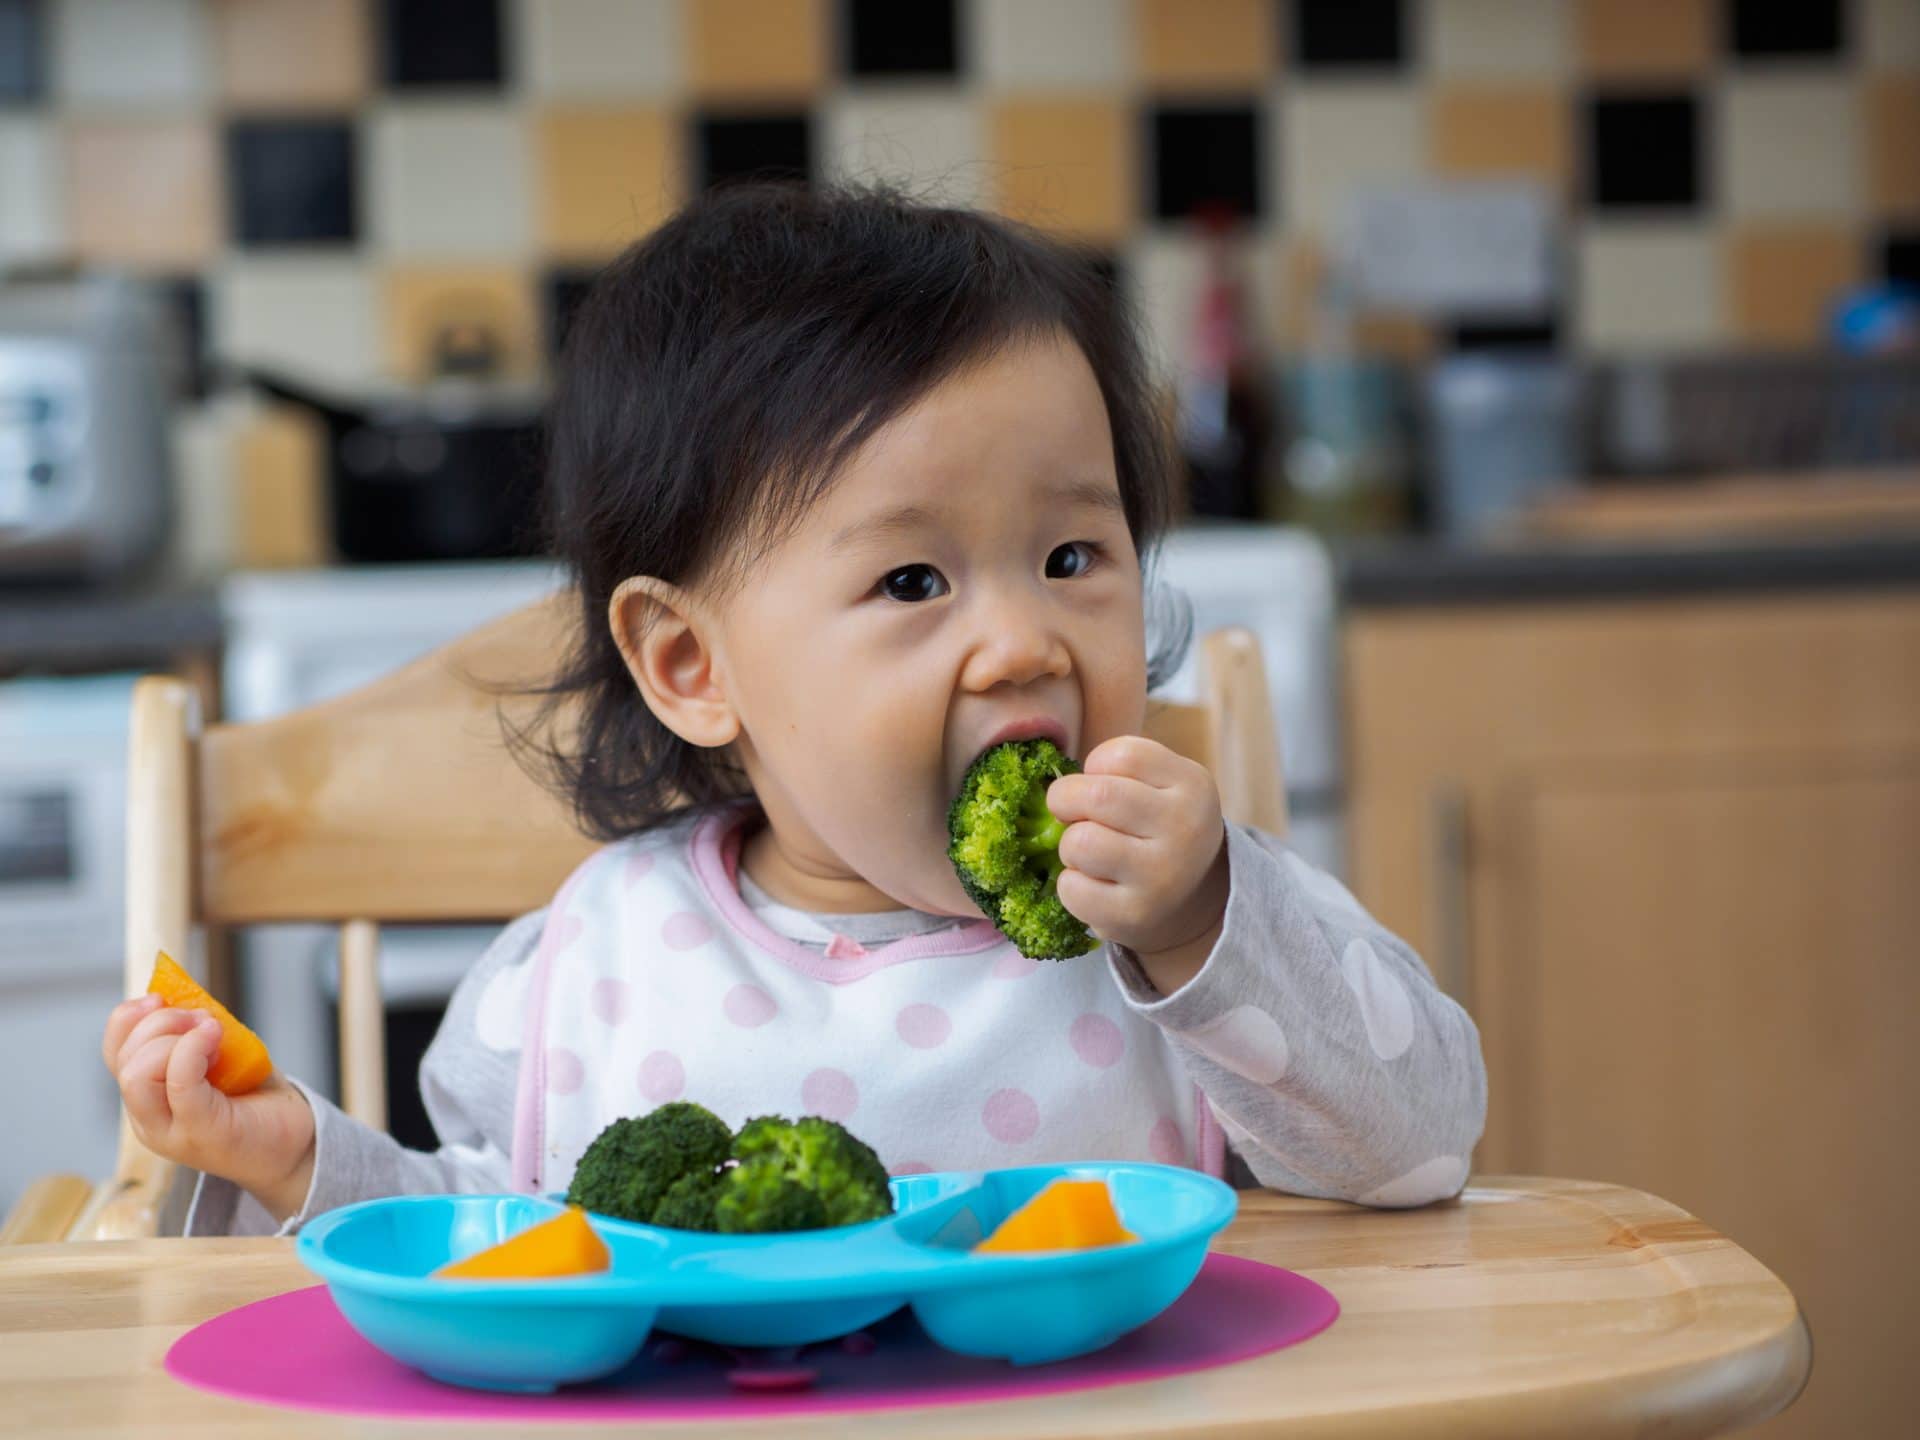 Baby's first foods: The 10 best foods for babies